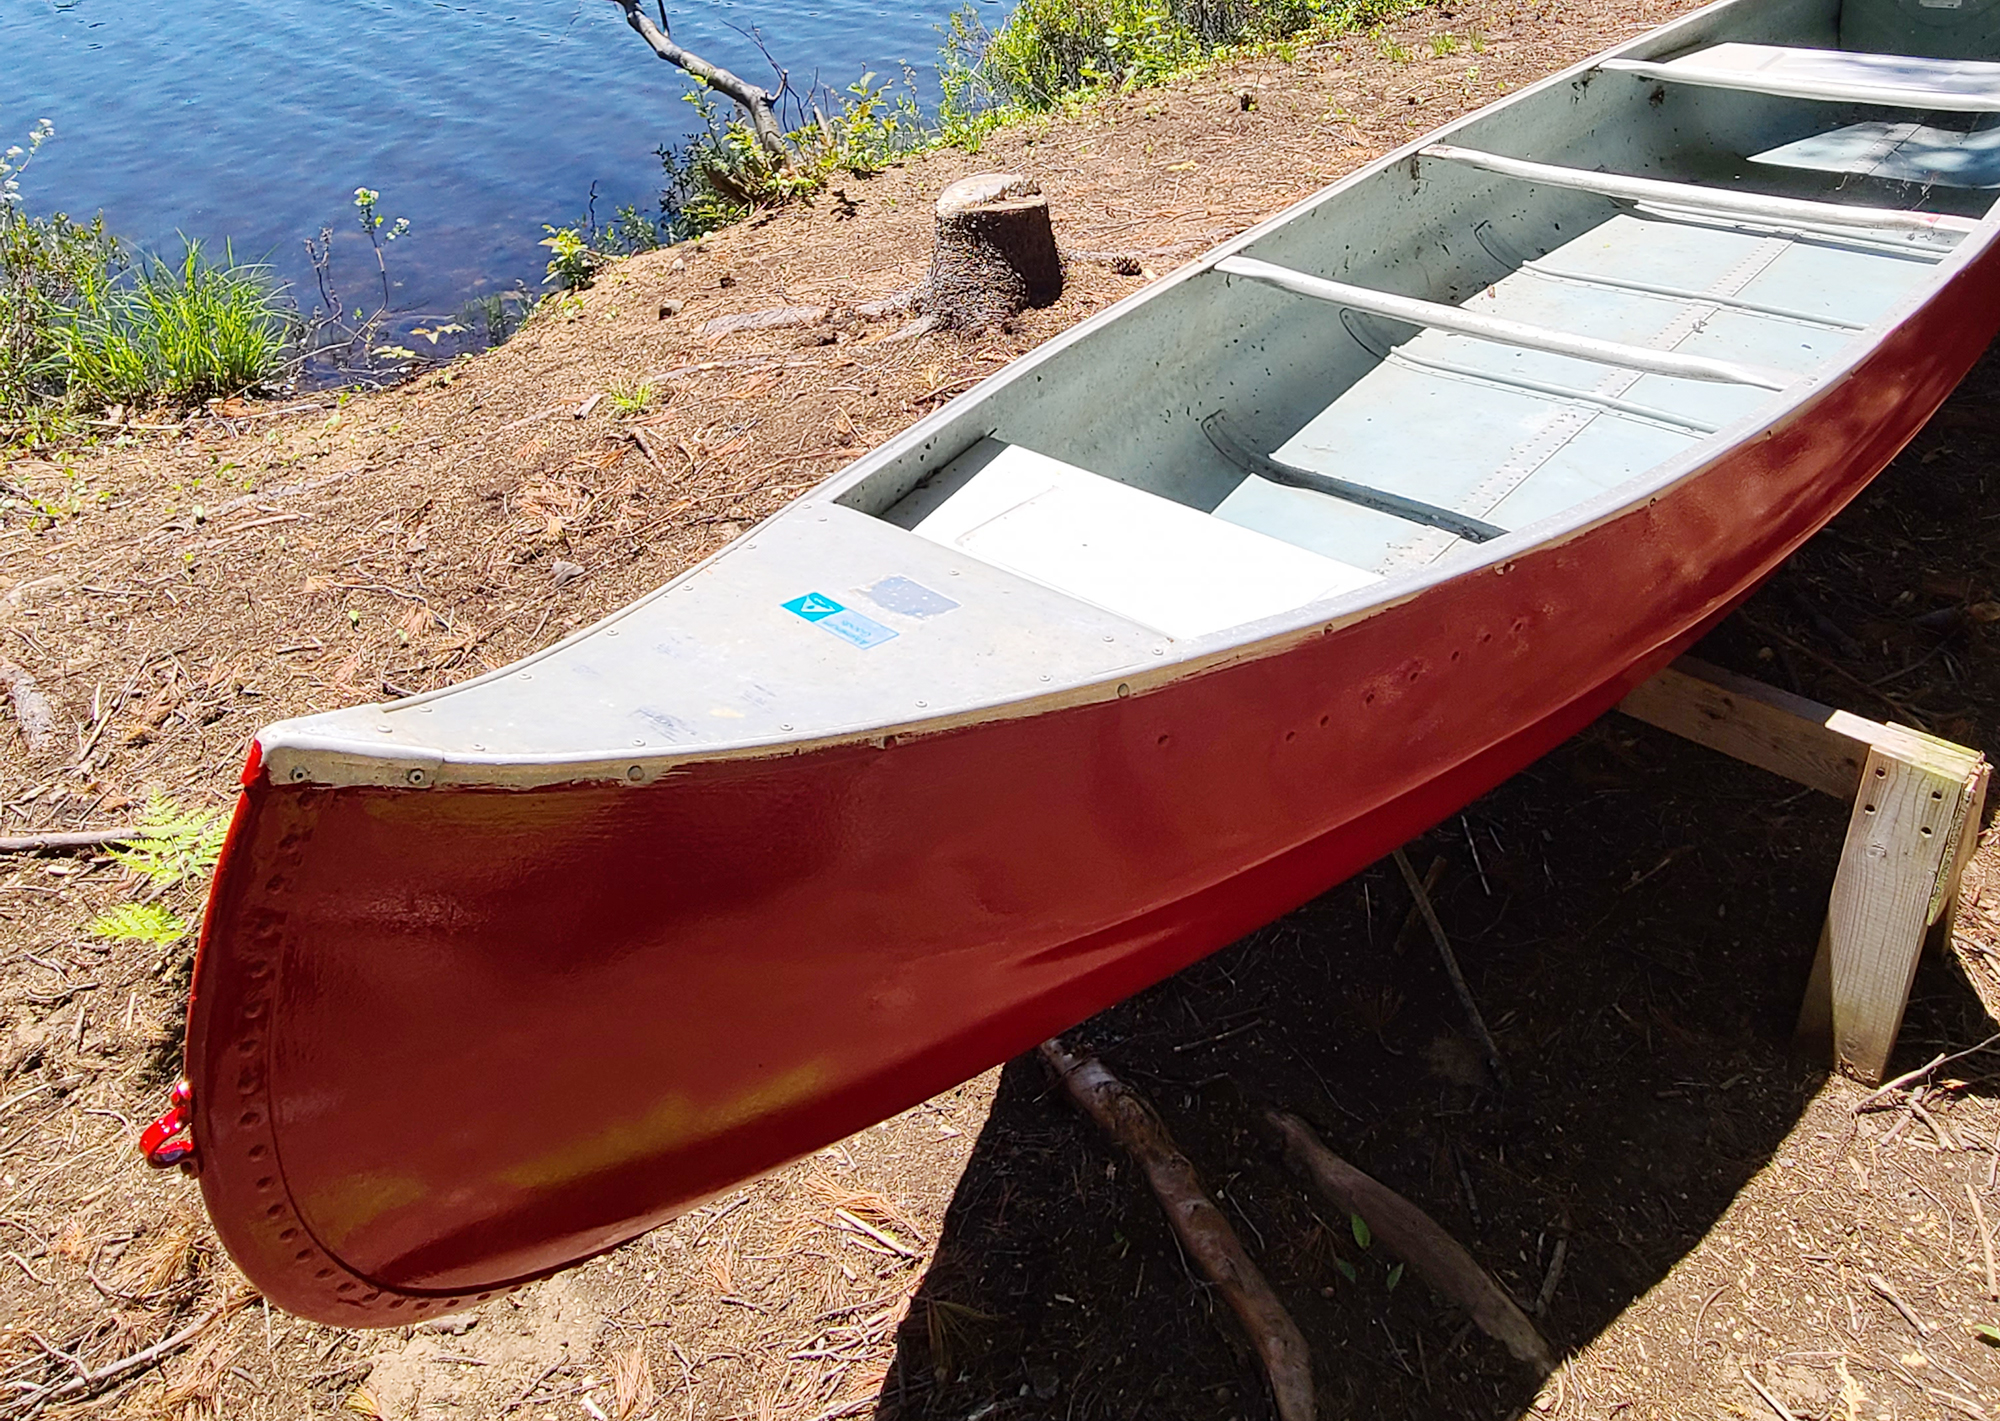 Newly painted canoe drying in sun.